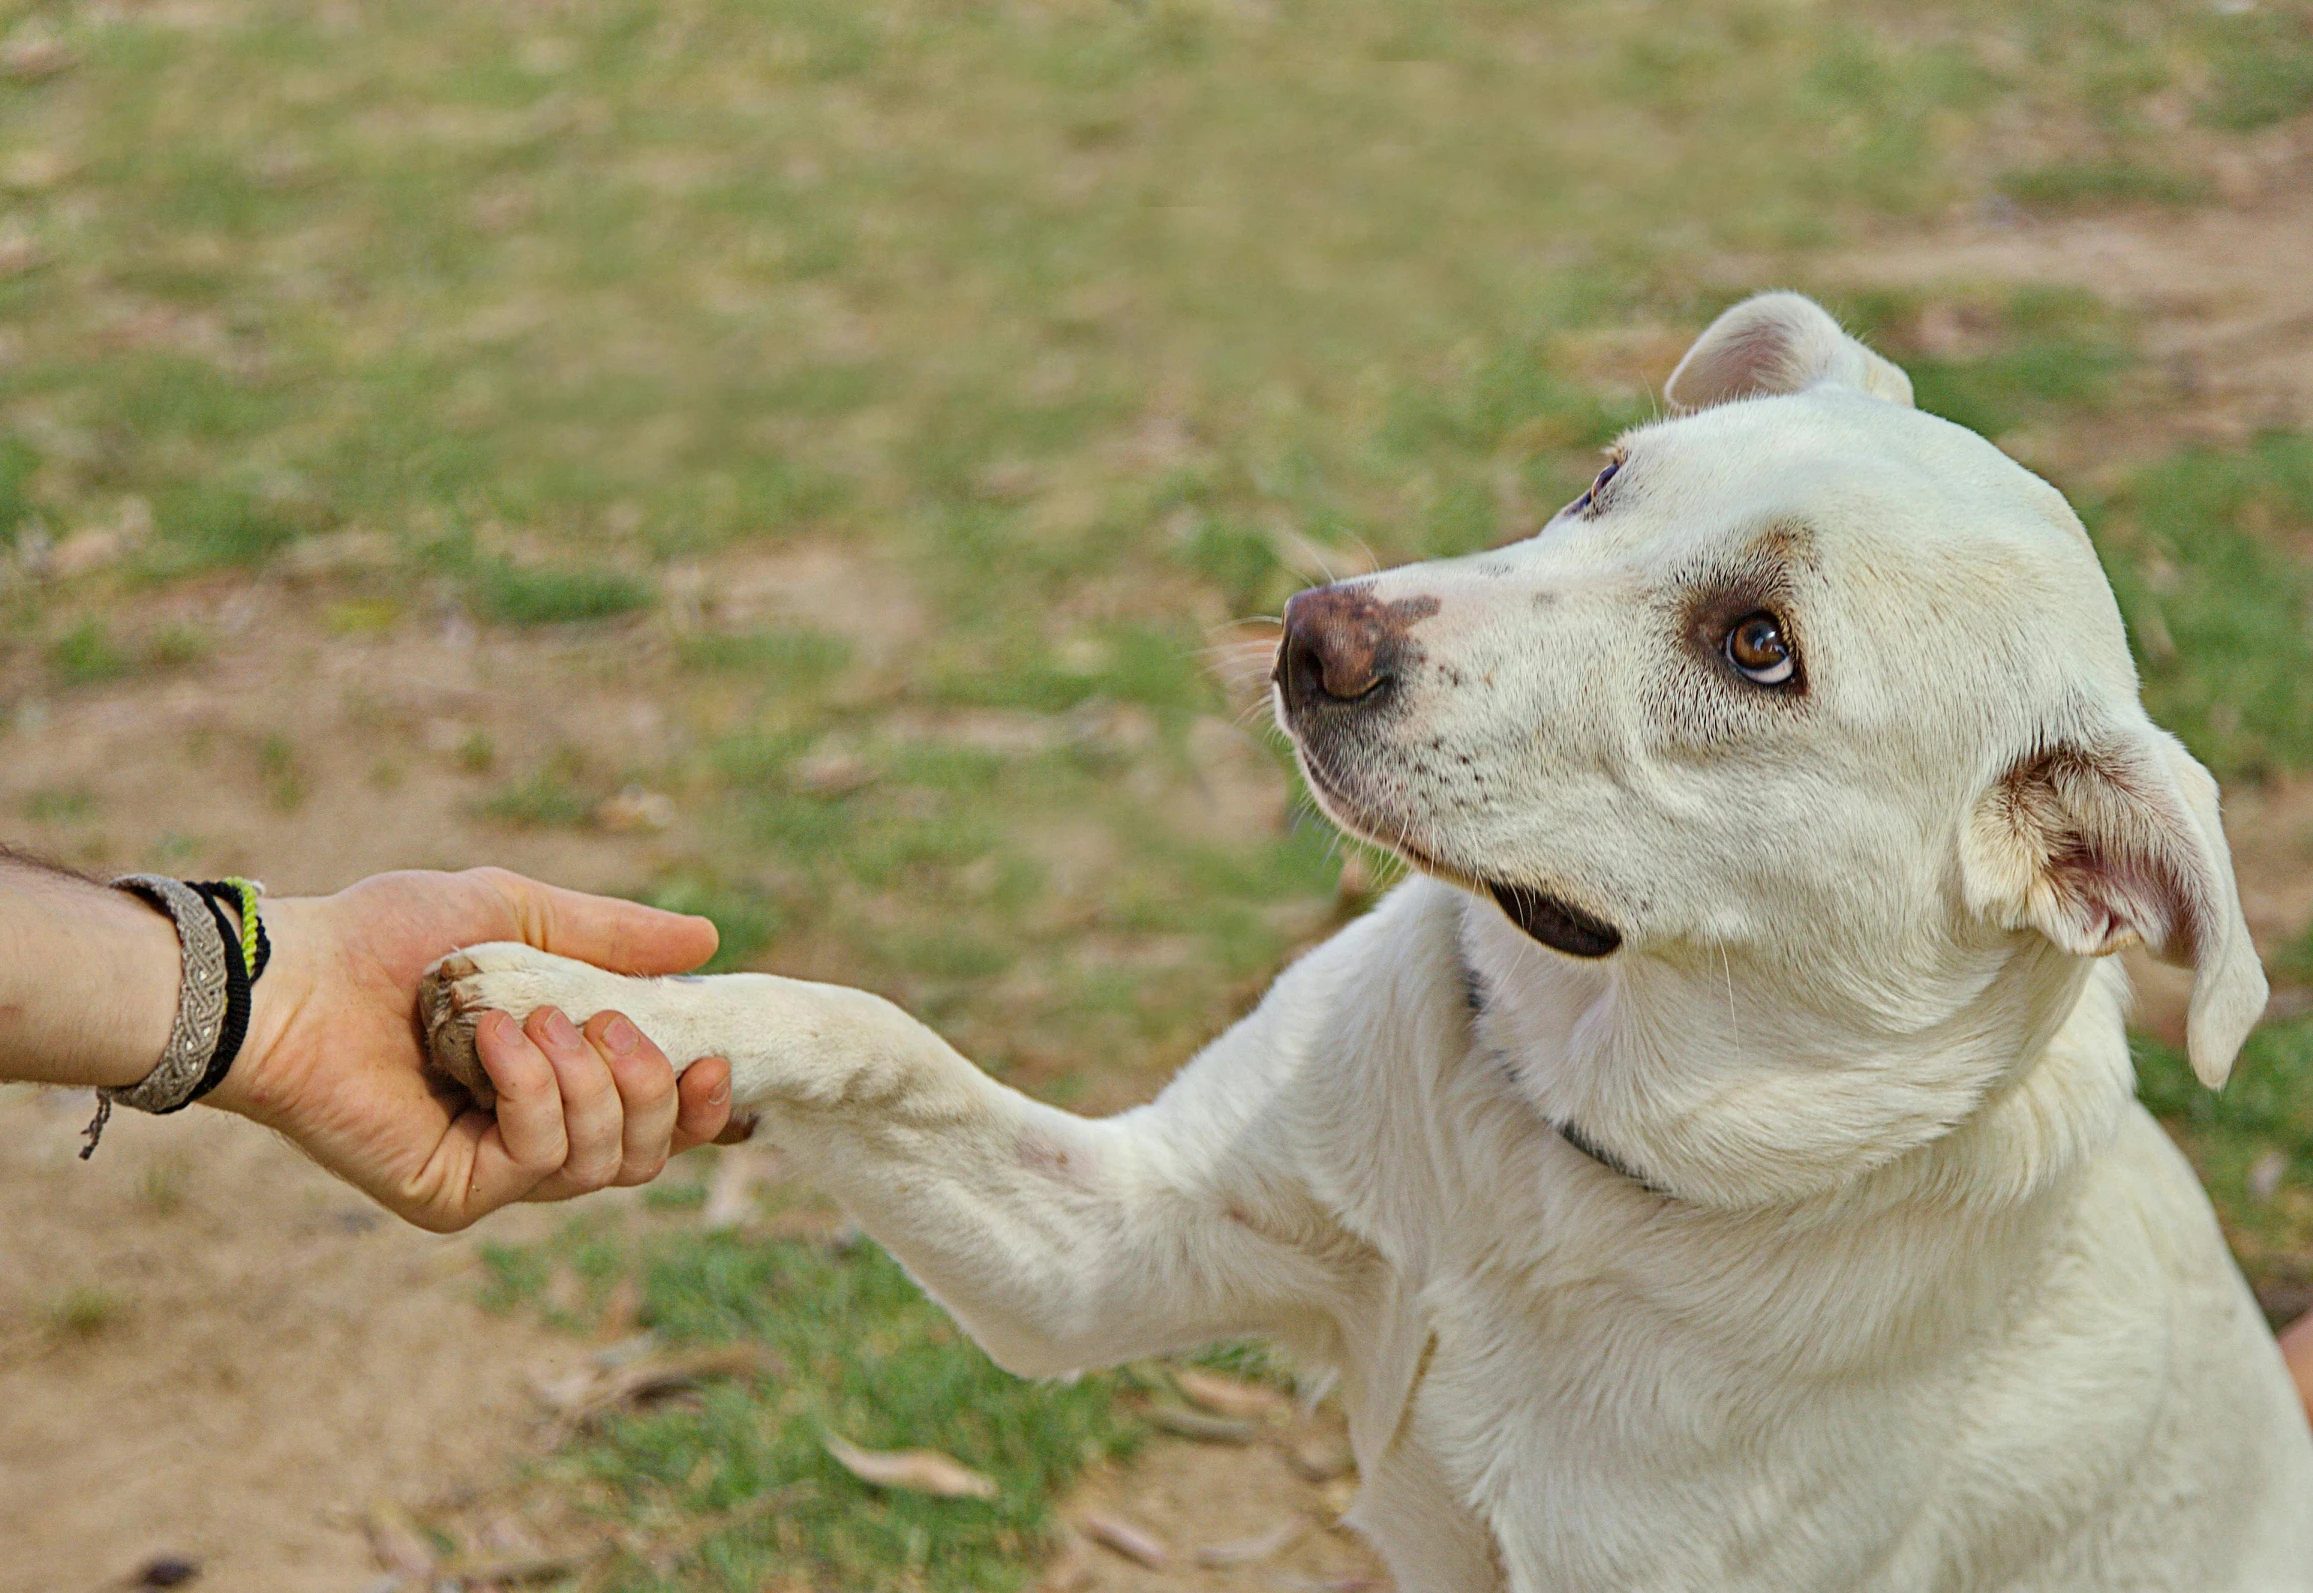 a dog is holding soing up to the hand of a person